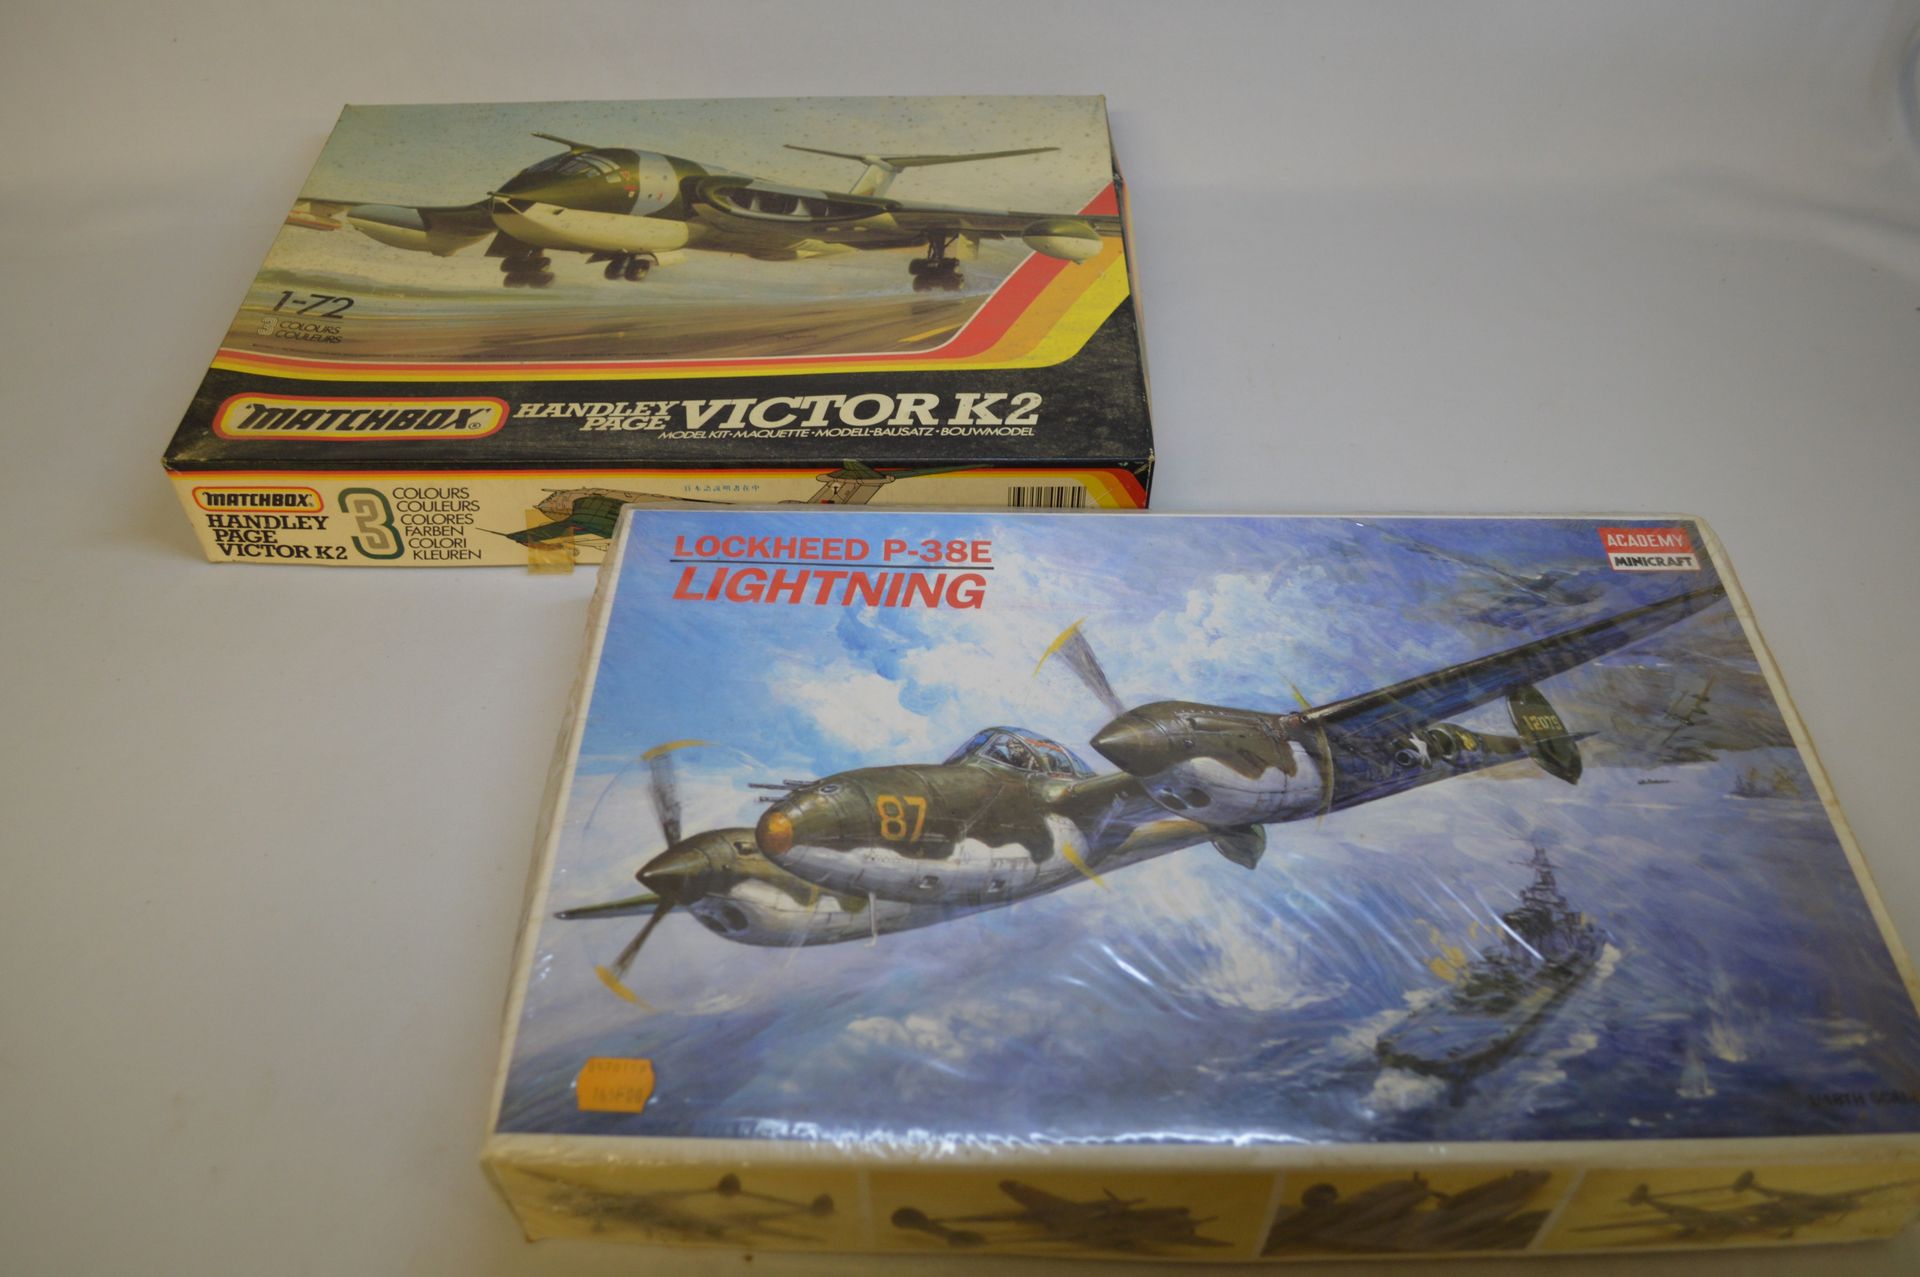 Null Set of aircraft models : 



- MATCHBOX - HANDLEY PAGE VICTOR K 2 - 1 : 72
&hellip;